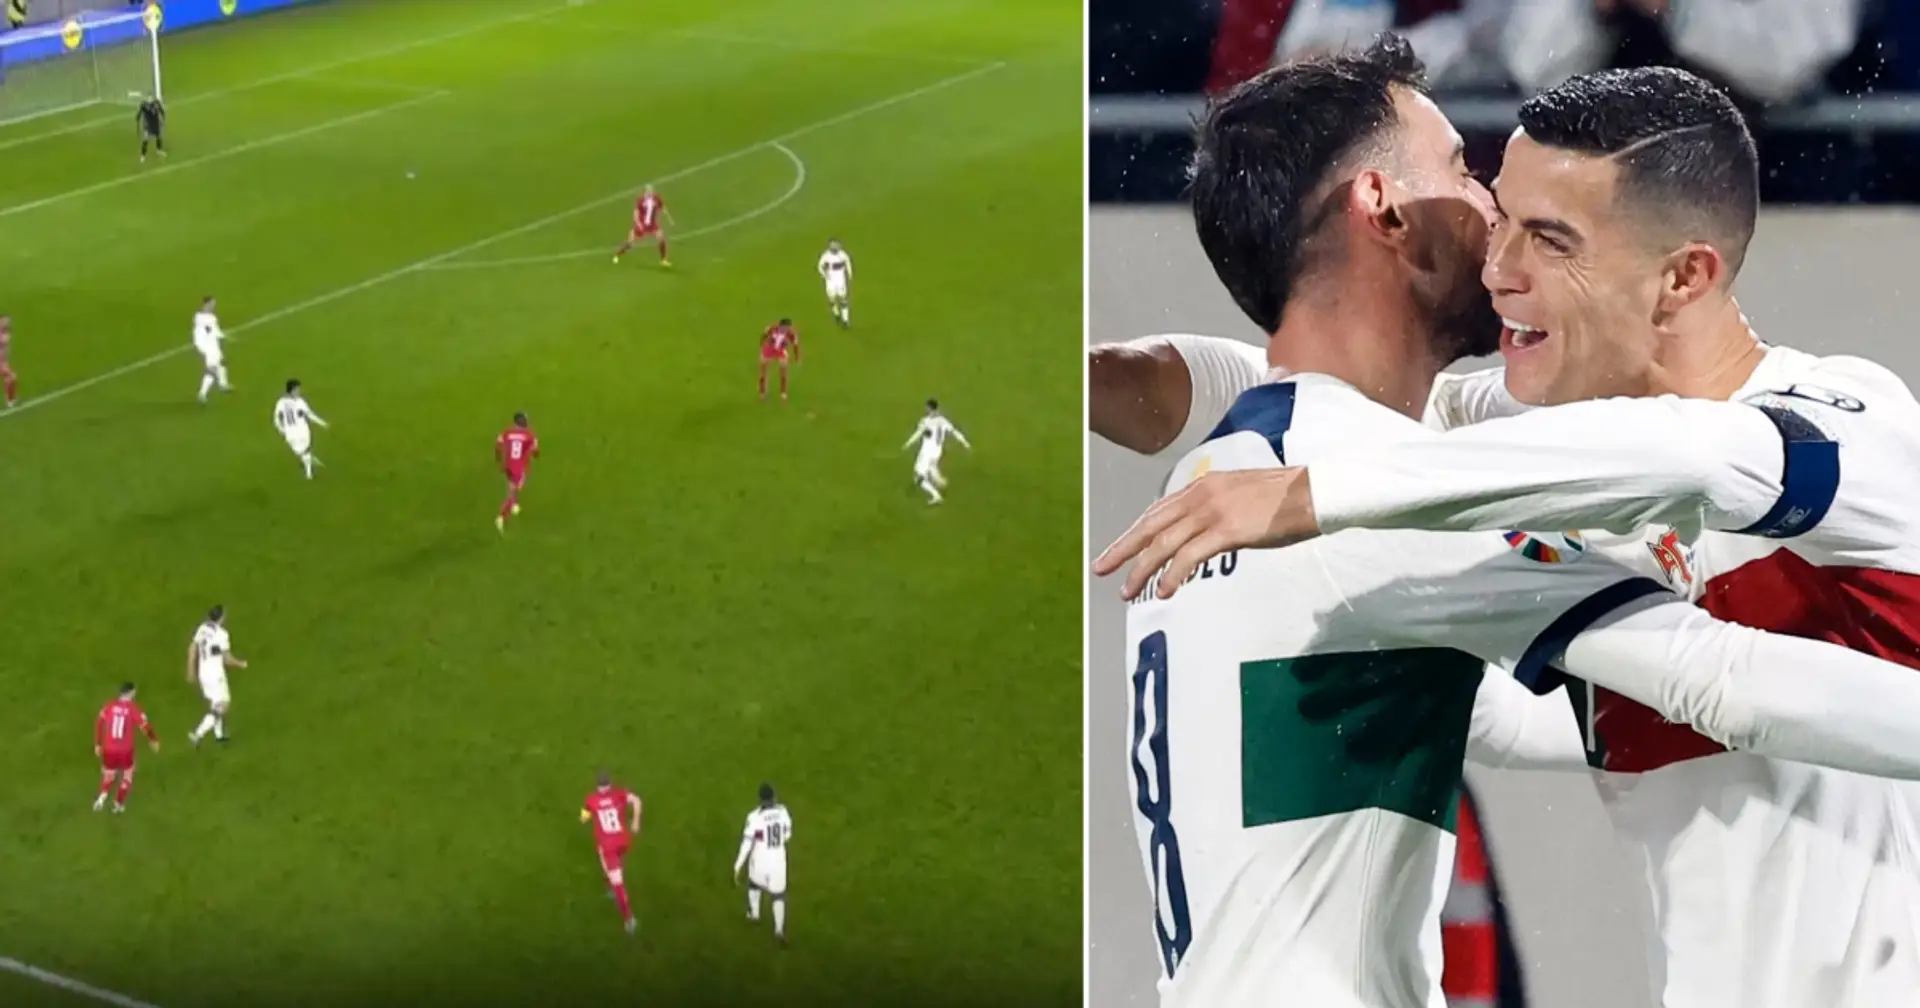 Bruno Fernandes assists Cristiano Ronaldo's goal for Portugal vs Luxembourg